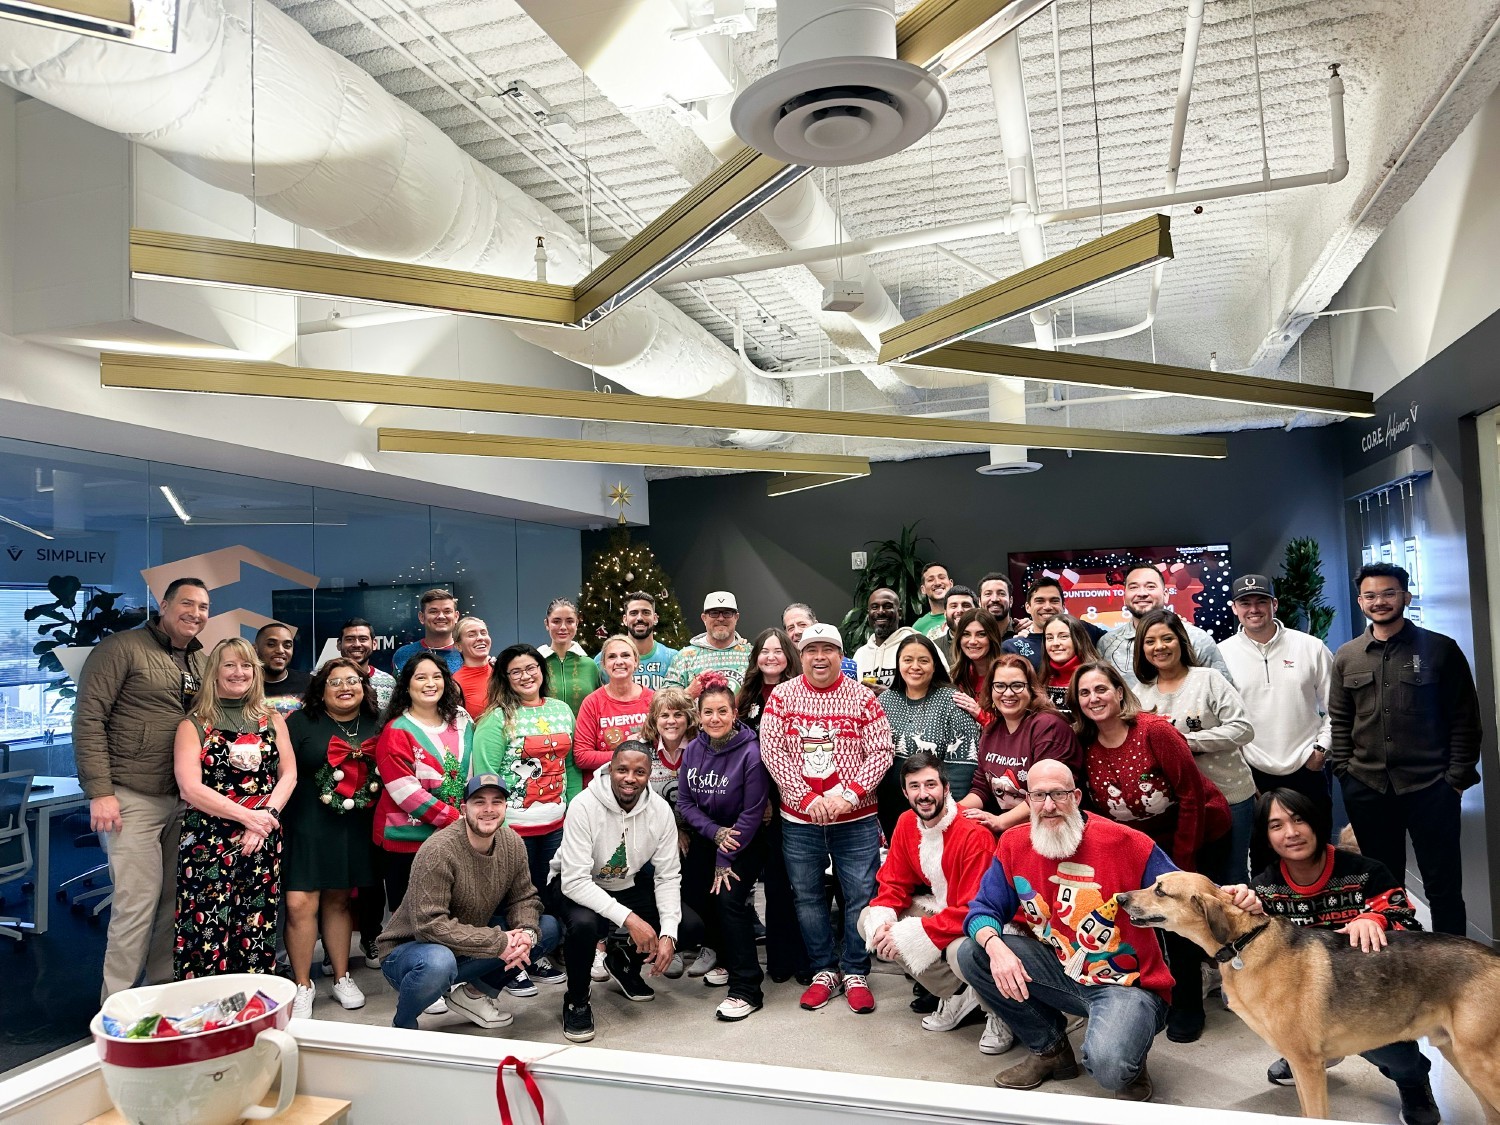 CV3 team members (and furry friends) from near and far gathered to celebrate the season.